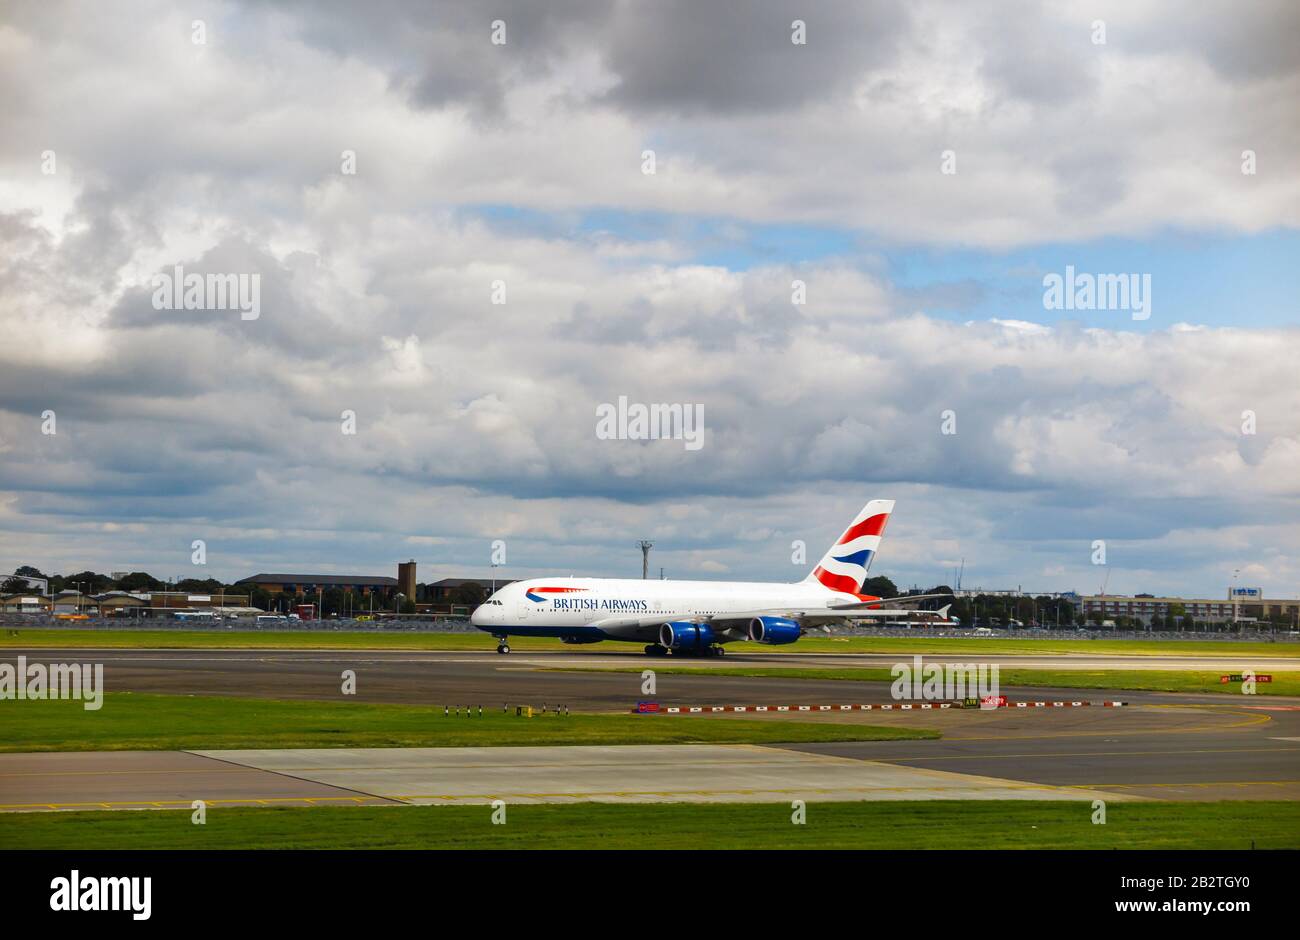 British Airways Airbus A380-861 in corporate livery taxiing on the runway in London Heathrow Airport viewed from Terminal 3 under dark gloomy clouds Stock Photo